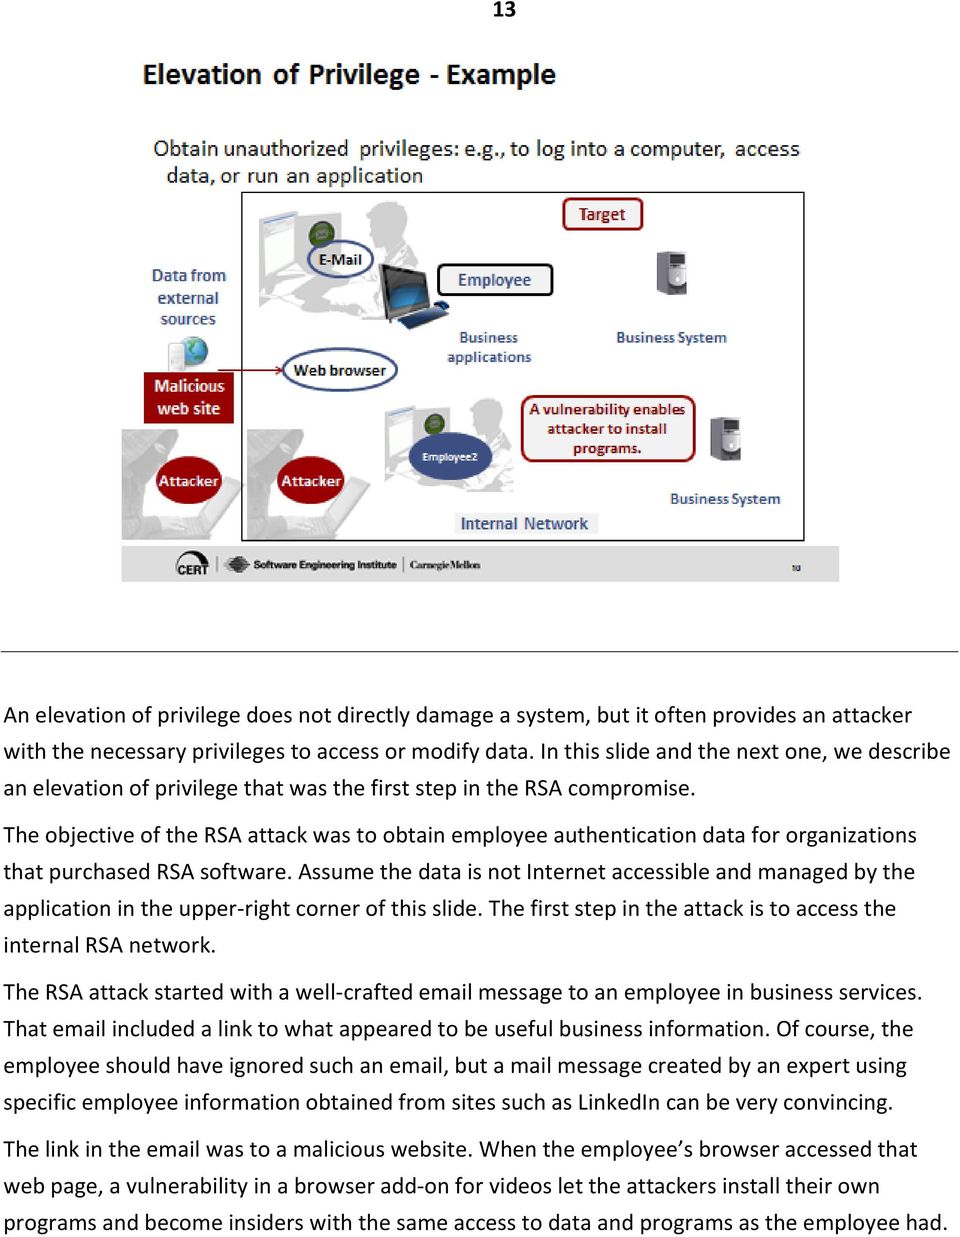 The objective of the RSA attack was to obtain employee authentication data for organizations that purchased RSA software.